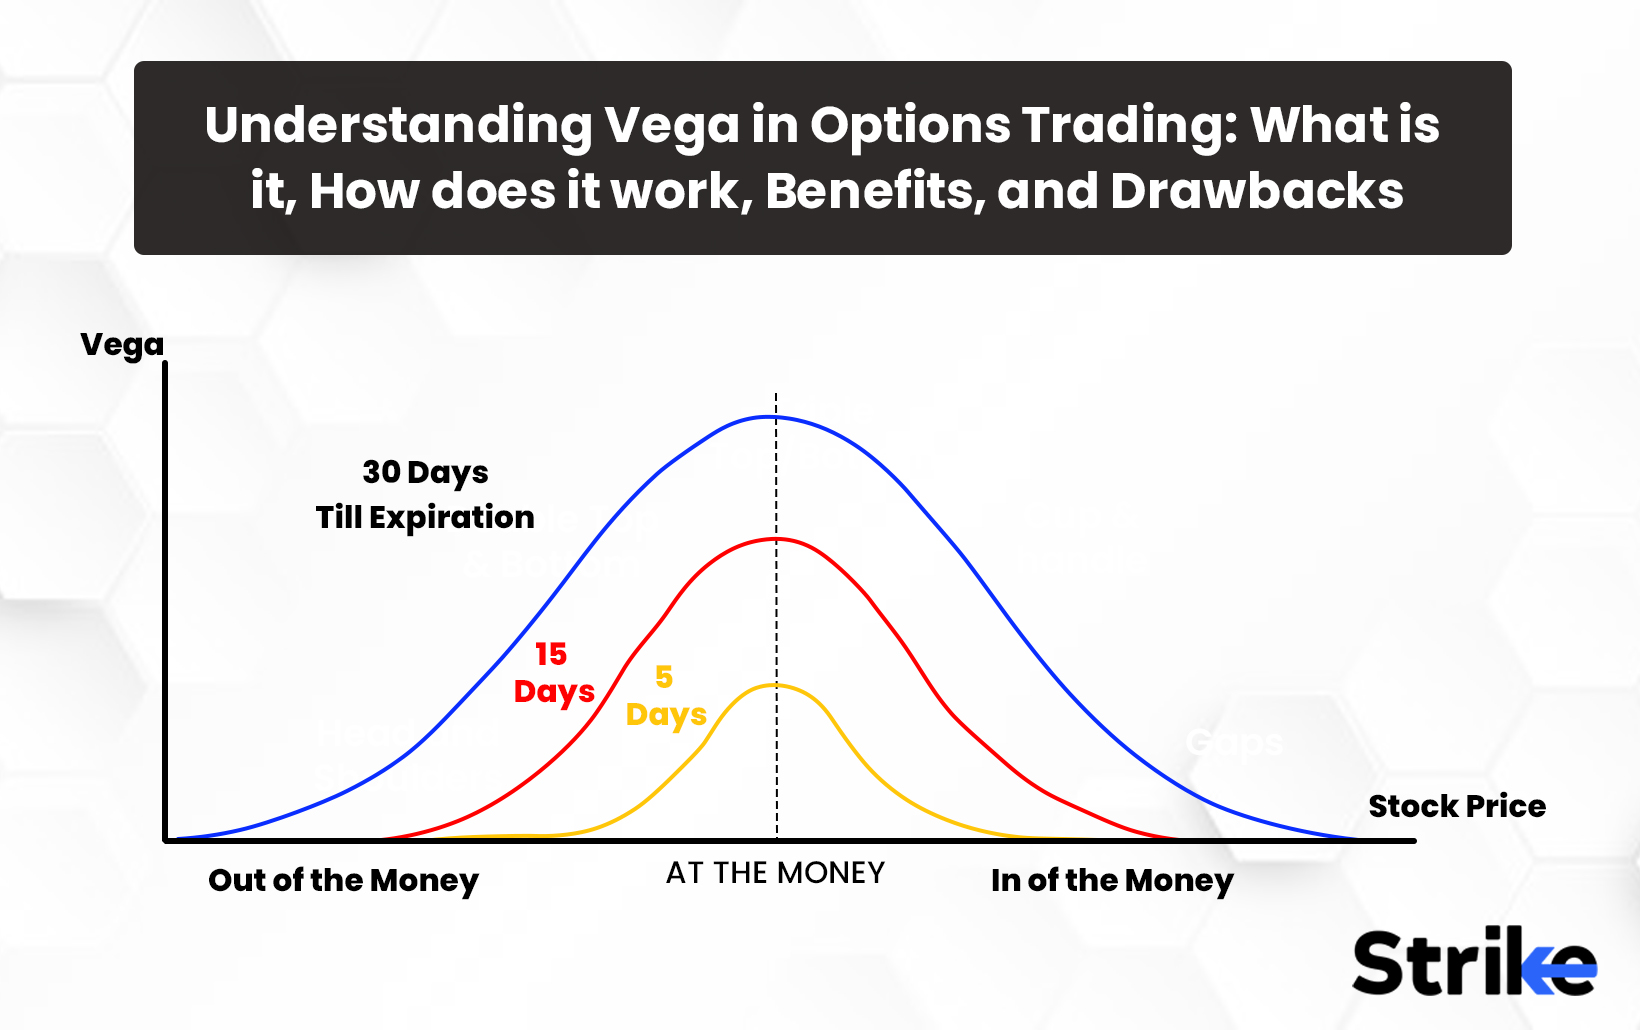 Understanding Vega in Options Trading: What is it, How does it work, Benefits, and Drawbacks